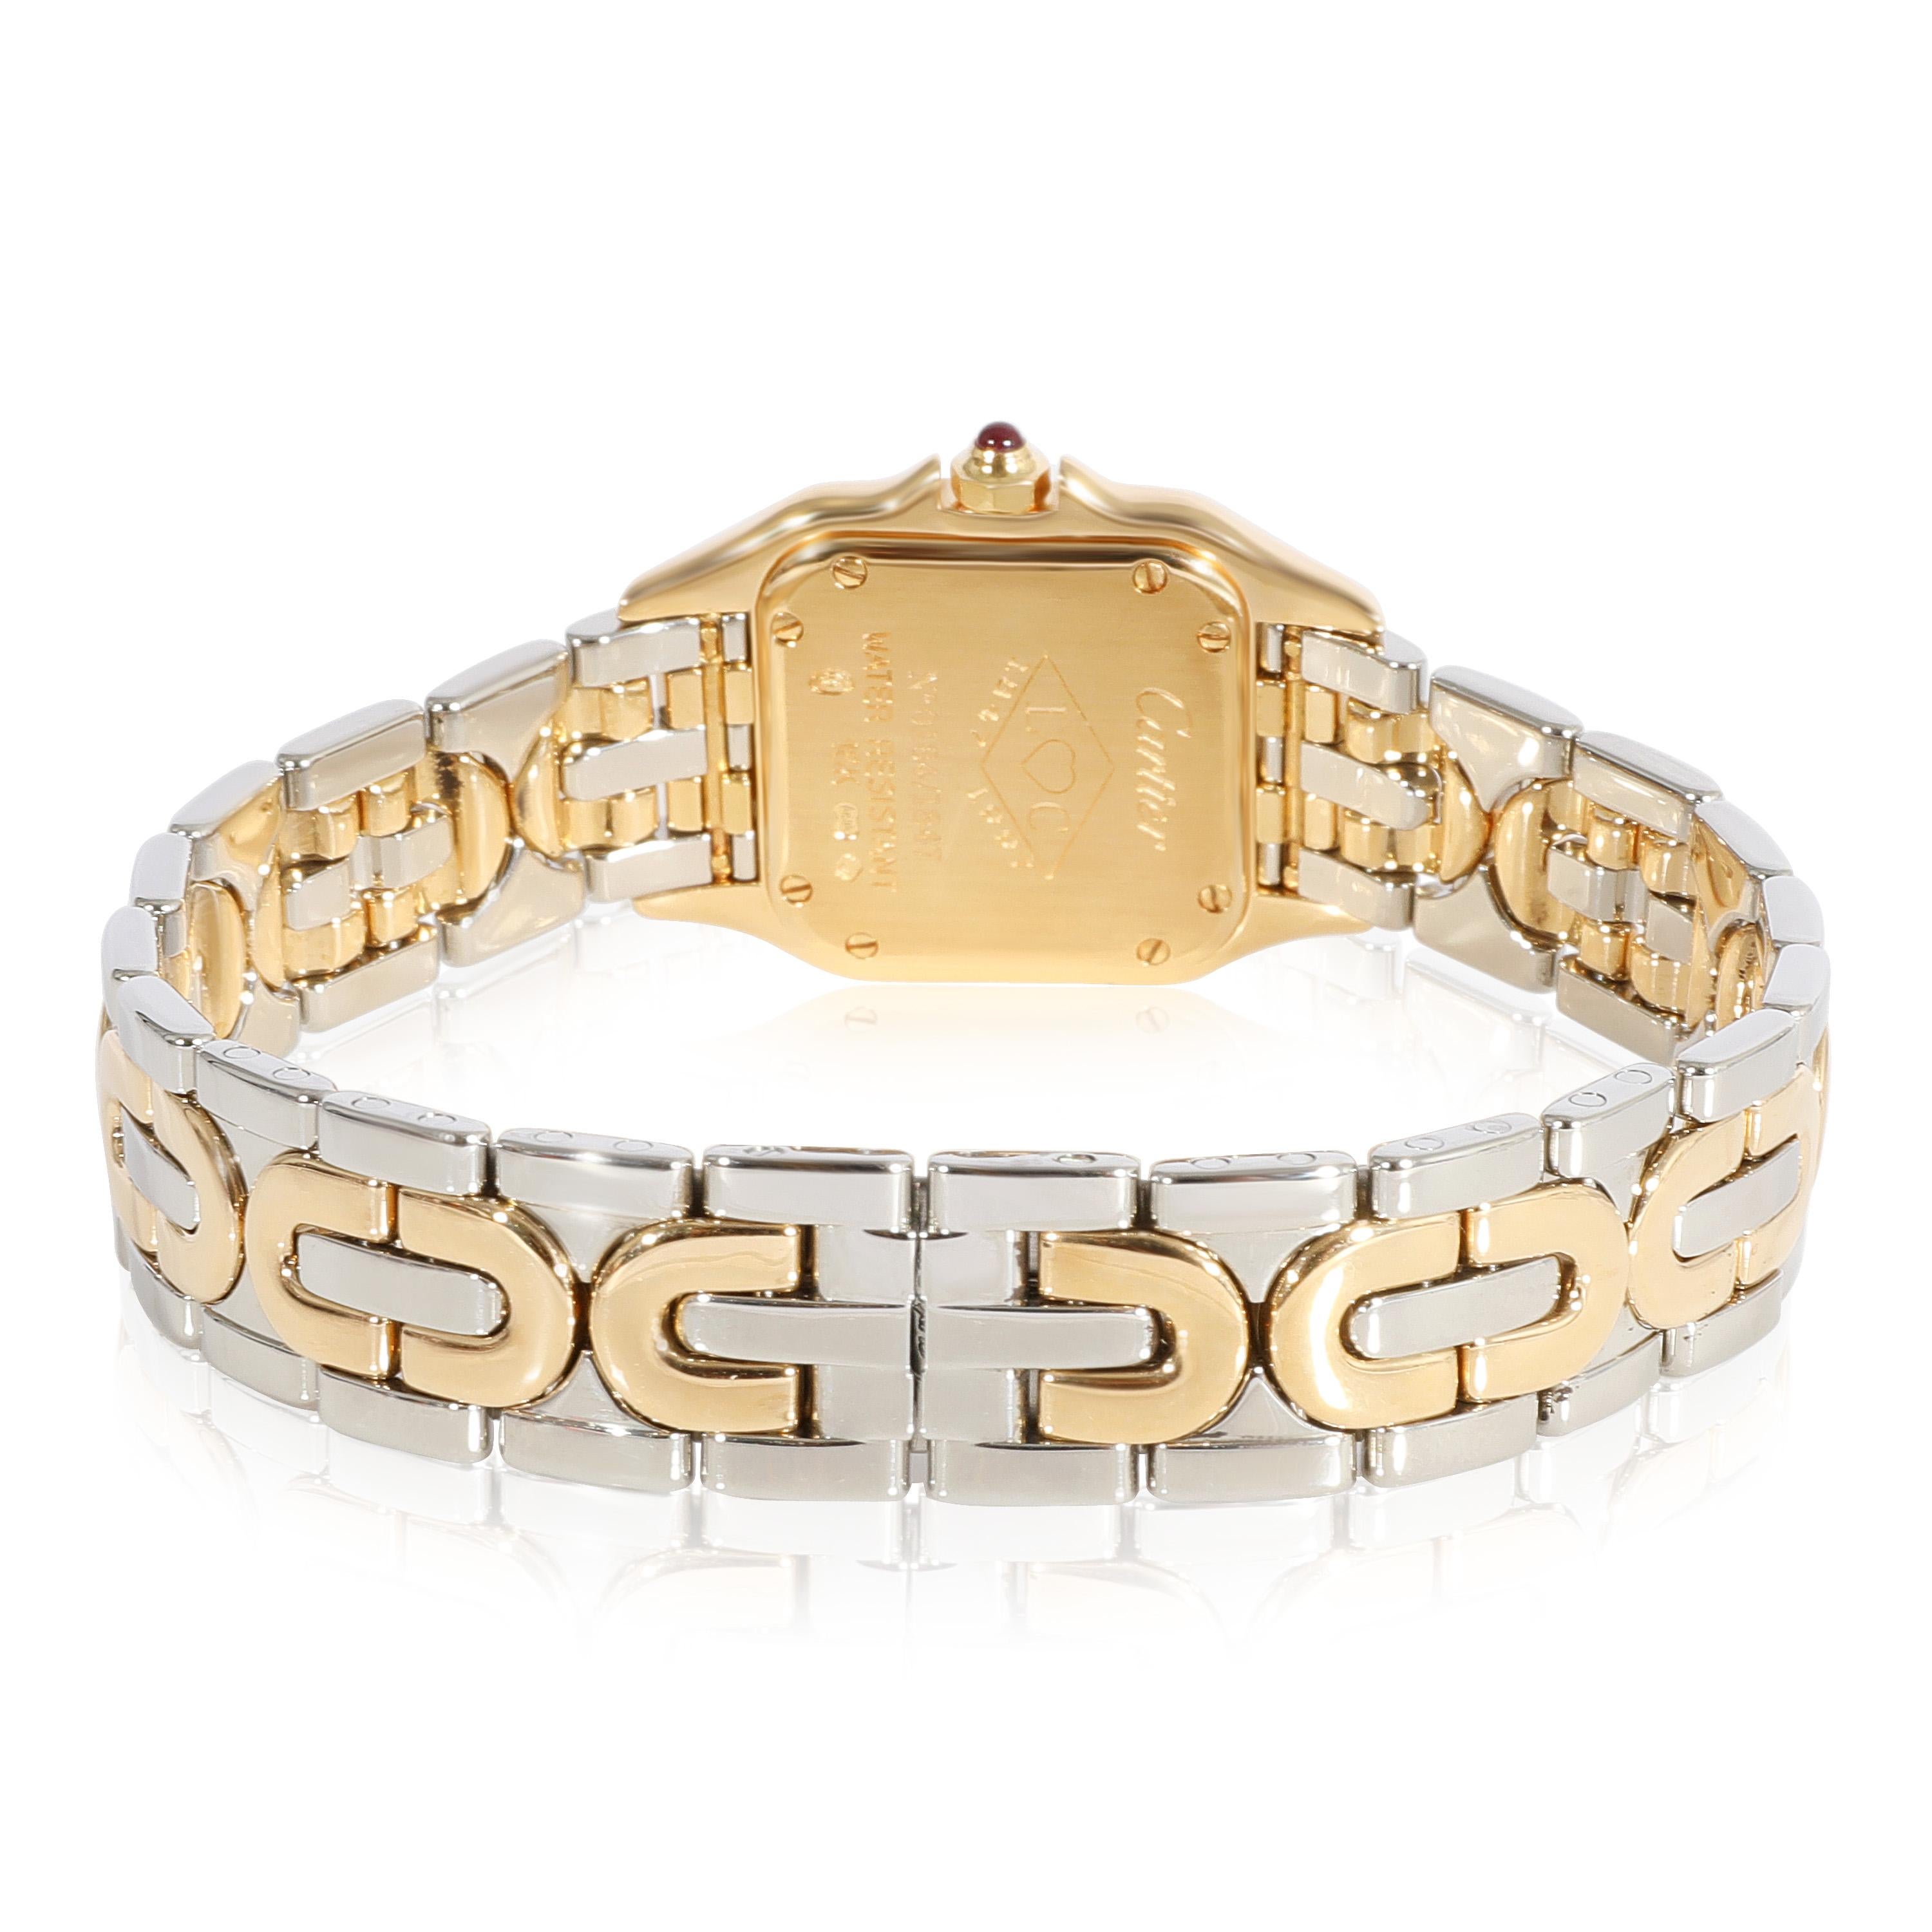 Cartier Panthere Art Deco W25046S1 Women's Watch in 18kt Stainless Steel/Yellow

SKU: 121712

PRIMARY DETAILS
Brand: Cartier
Model: Panthere Art Deco
Country of Origin: Switzerland
Movement Type: Quartz: Battery
Year Manufactured: 1997
Year of